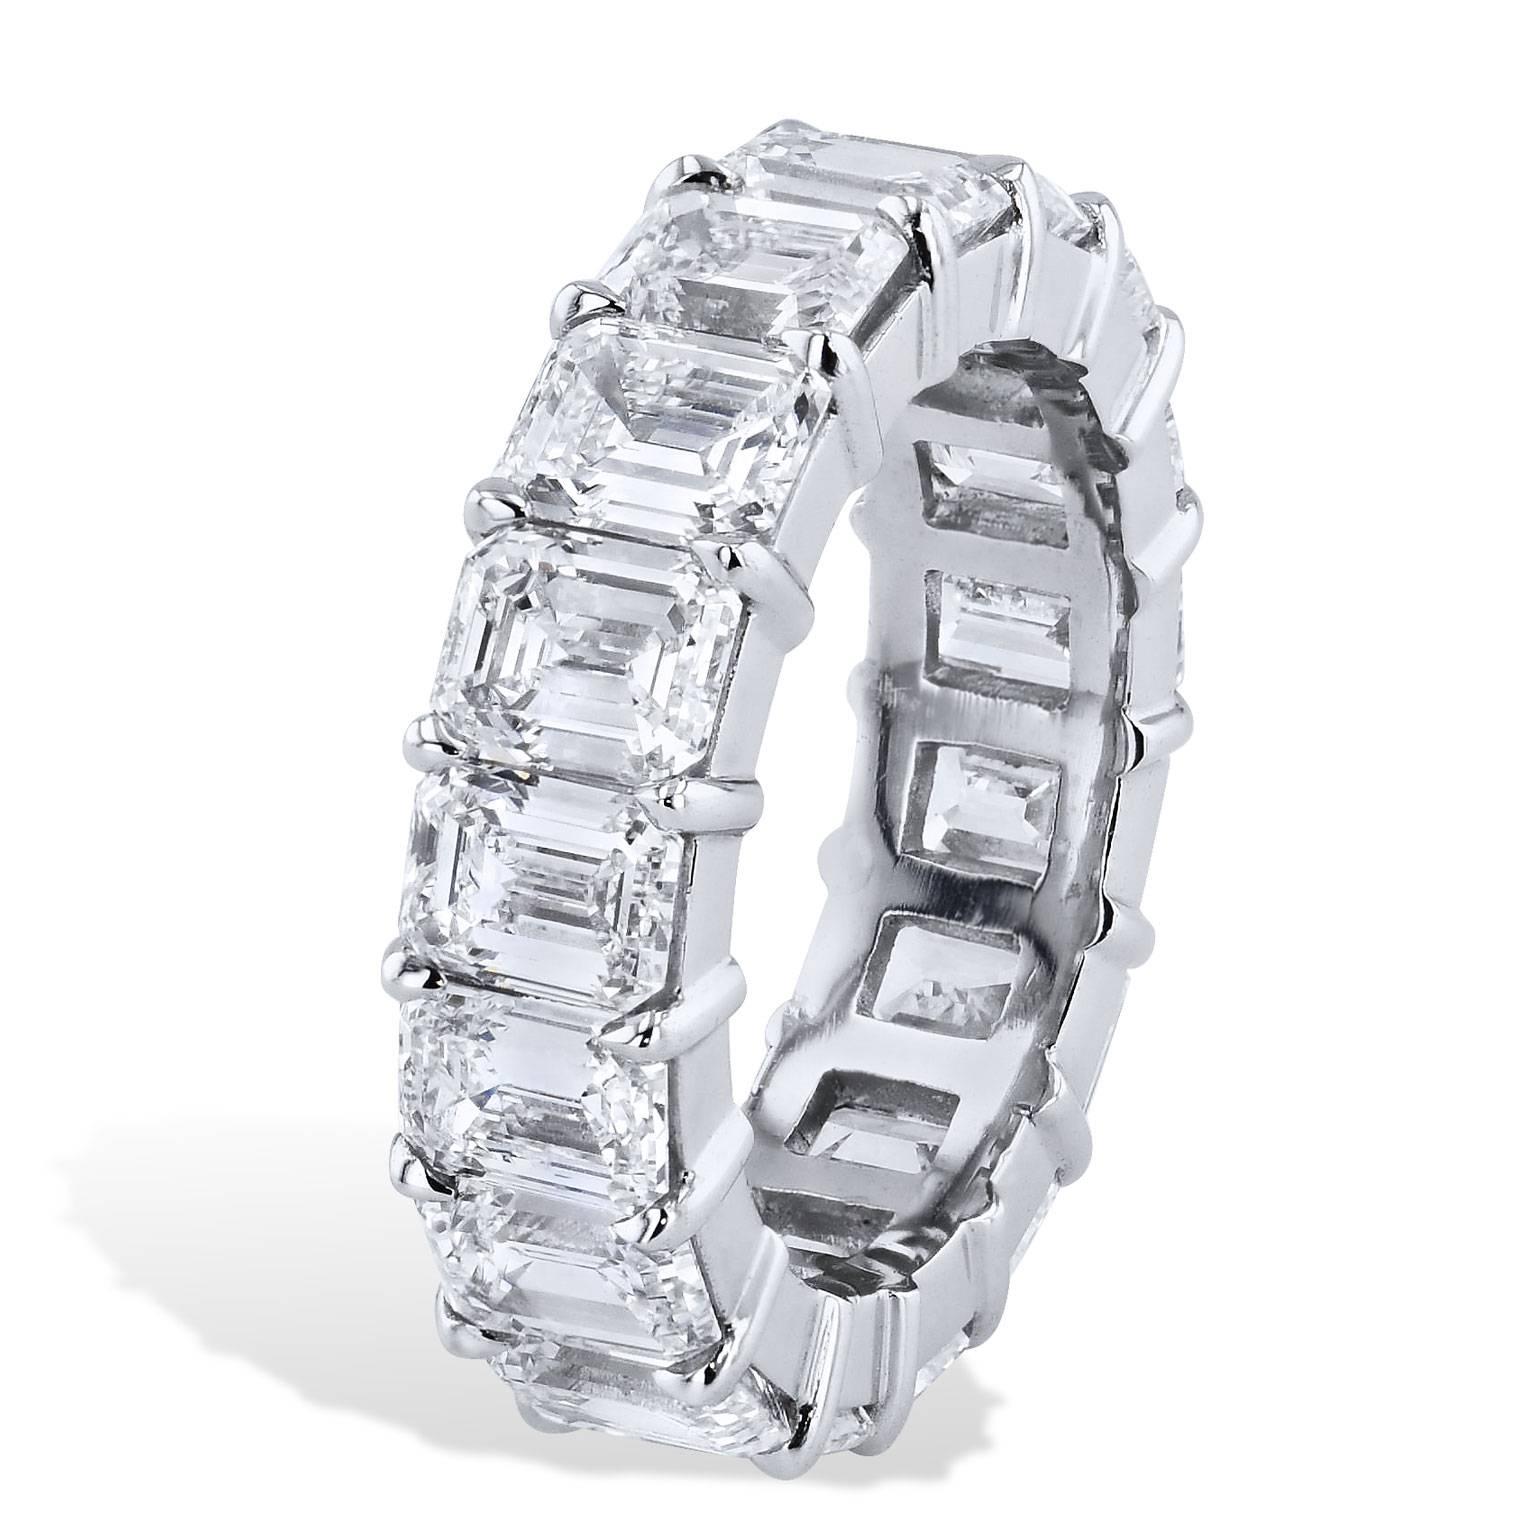 H&H 7.55 Carat Emerald Cut Diamond Eternity Band Ring

This is a handmade, one of a kind emerald cut diamond eternity band ring featuring 7.55 carats of emerald cut diamond in a shared prong setting the diamonds are as follows:  (D/E/F IF/VS2). 

It